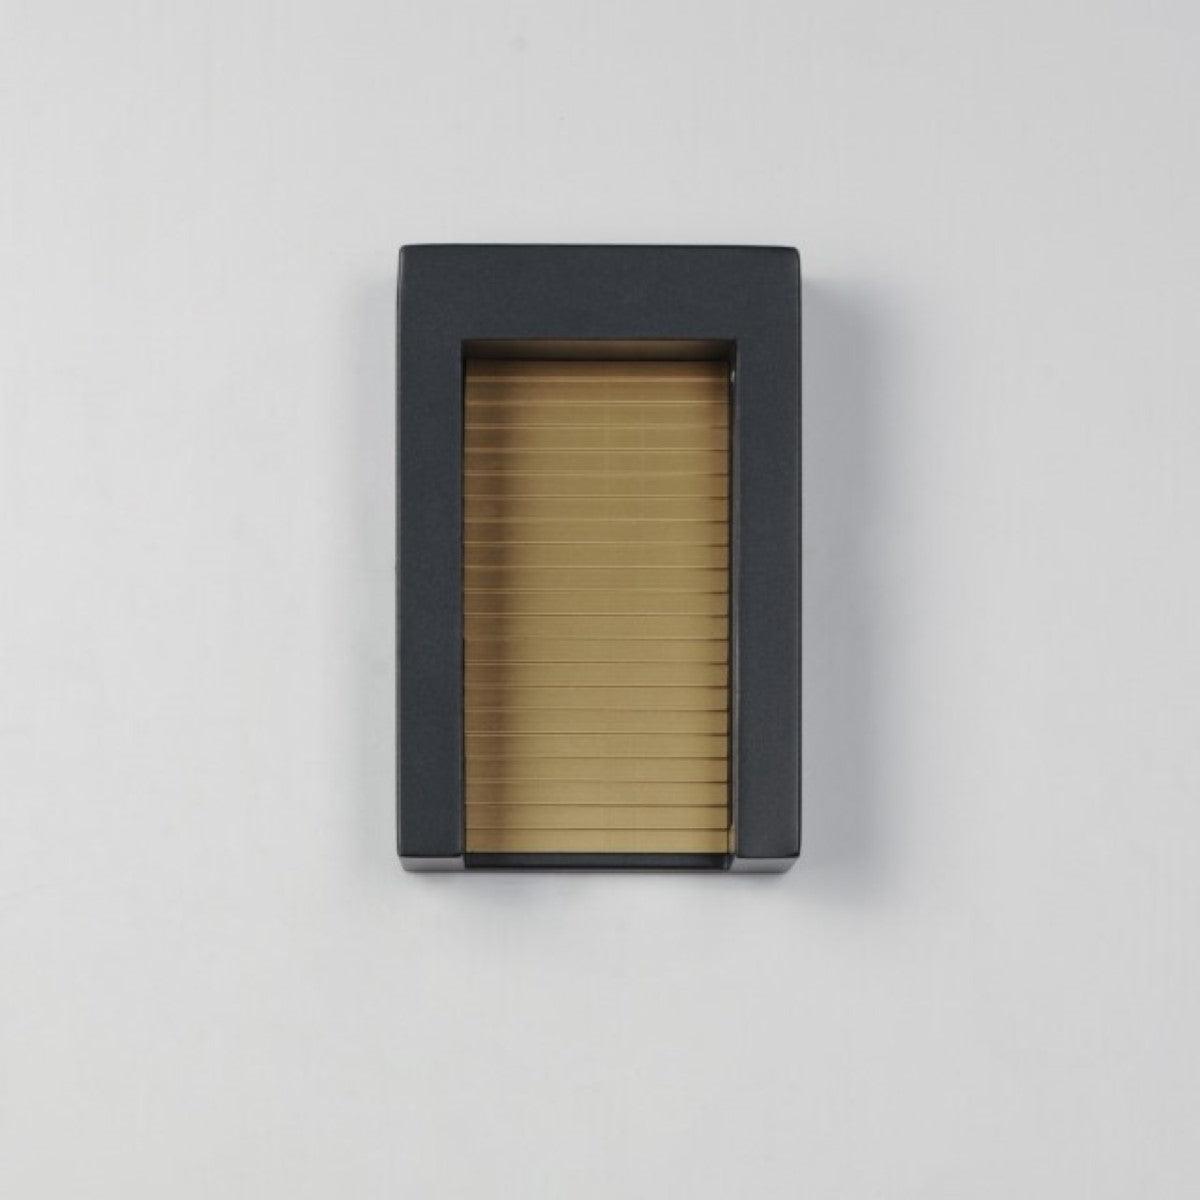 Alcove 10 in. LED Outdoor Wall Sconce 3000K Gold Finish